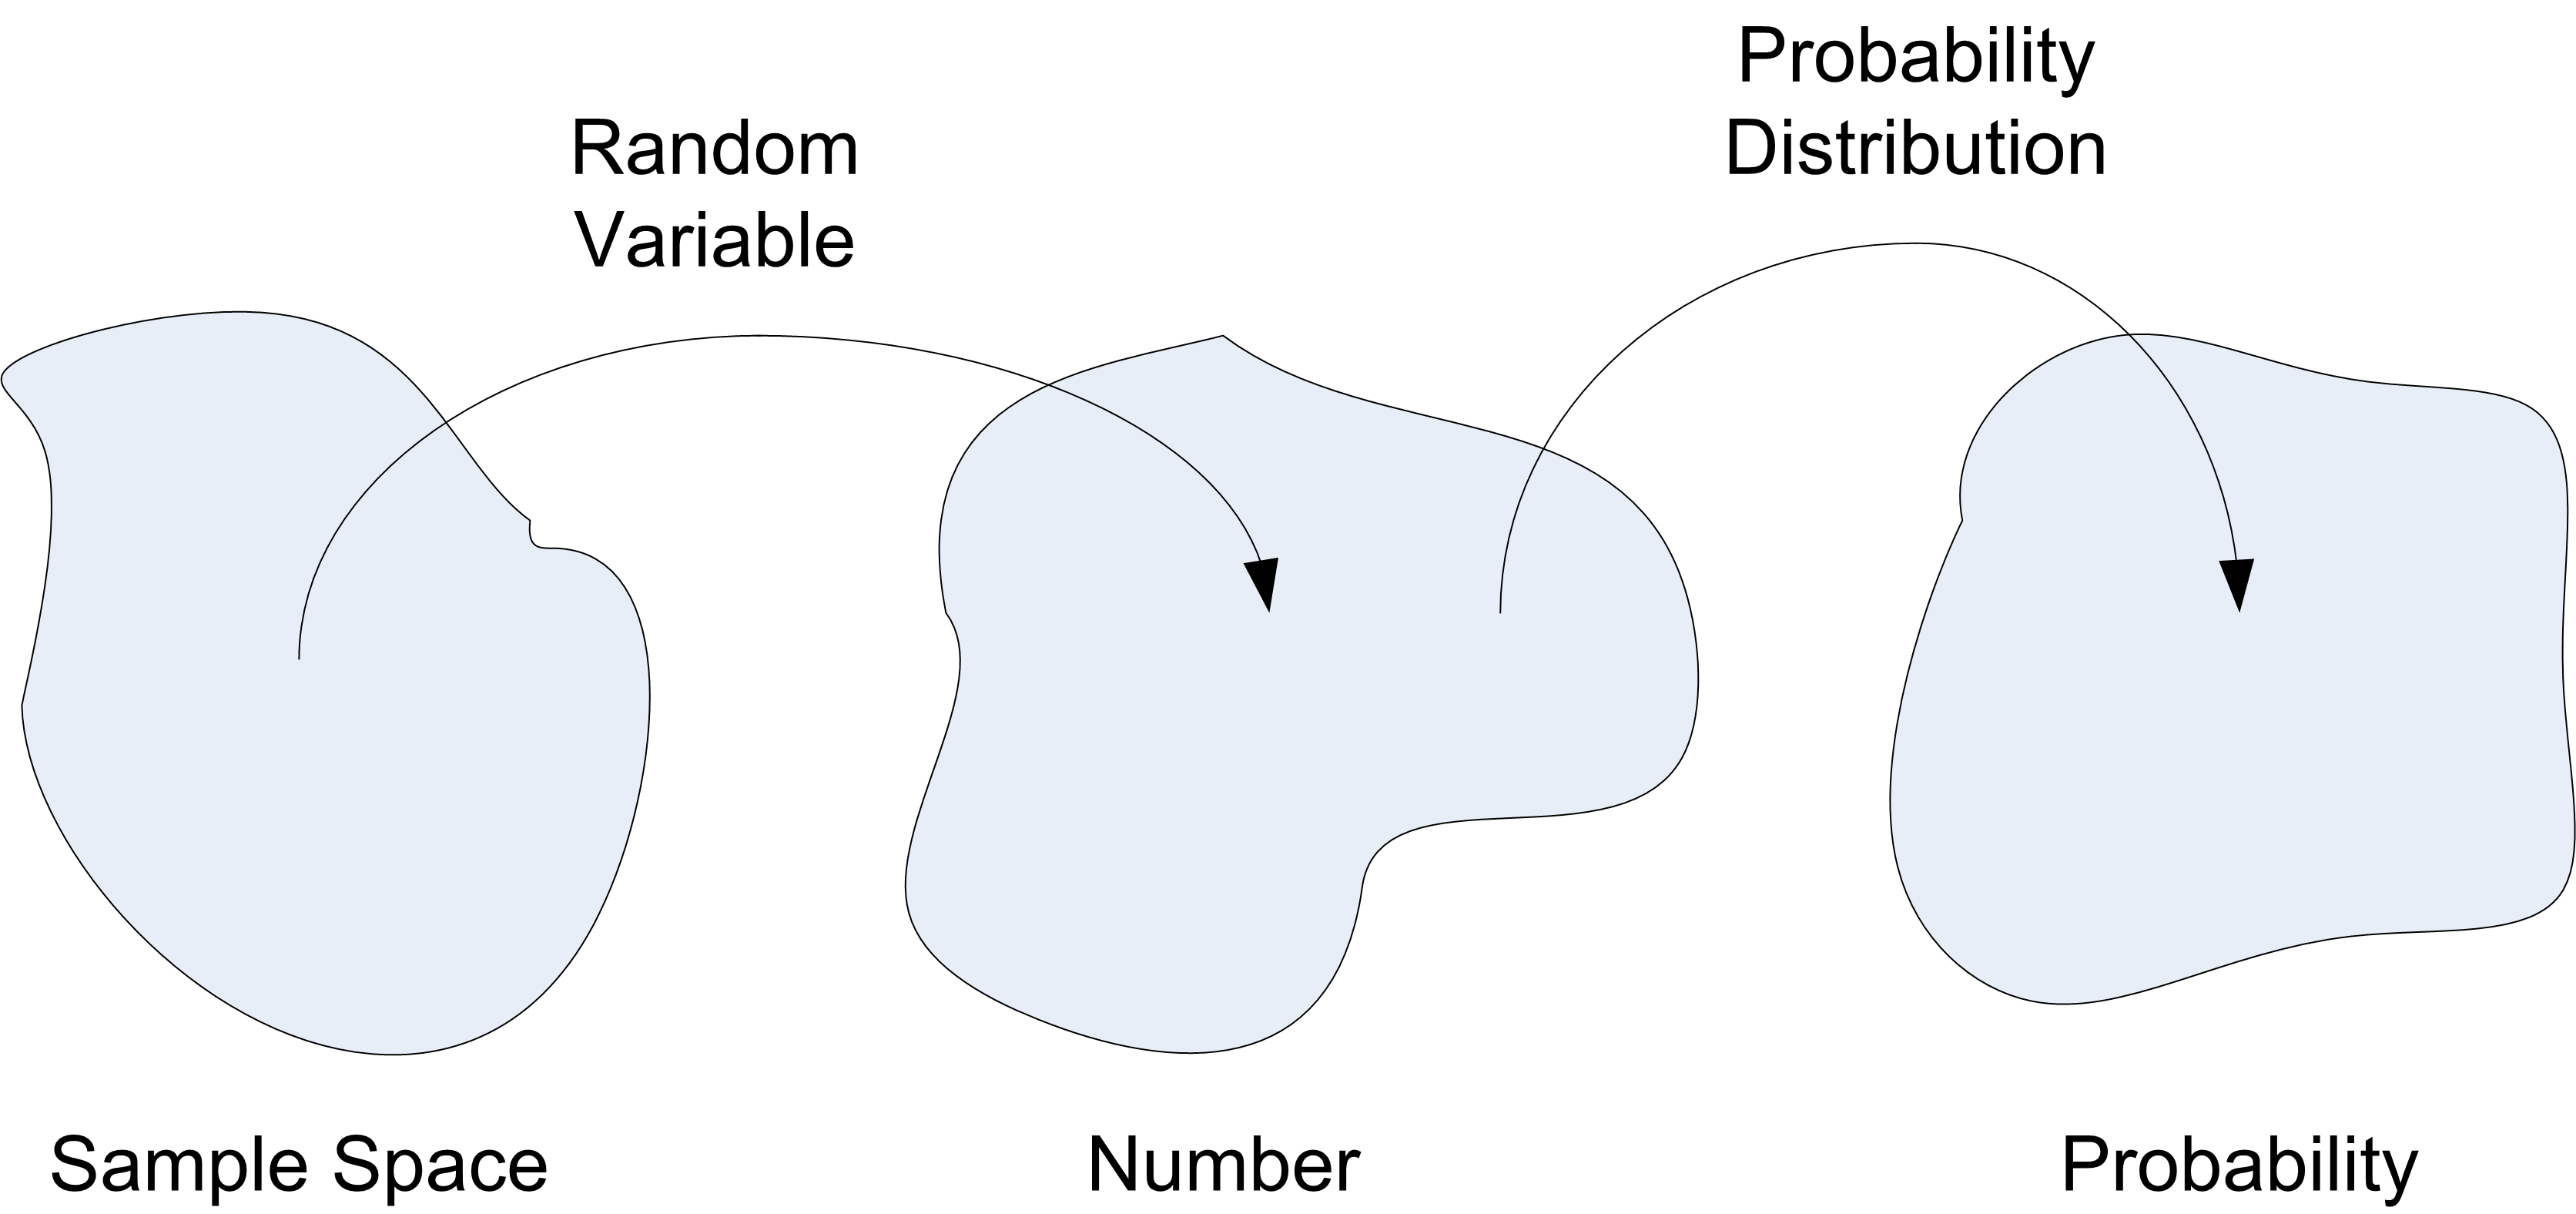 robability Distributions Map Random Variables to Probabilities